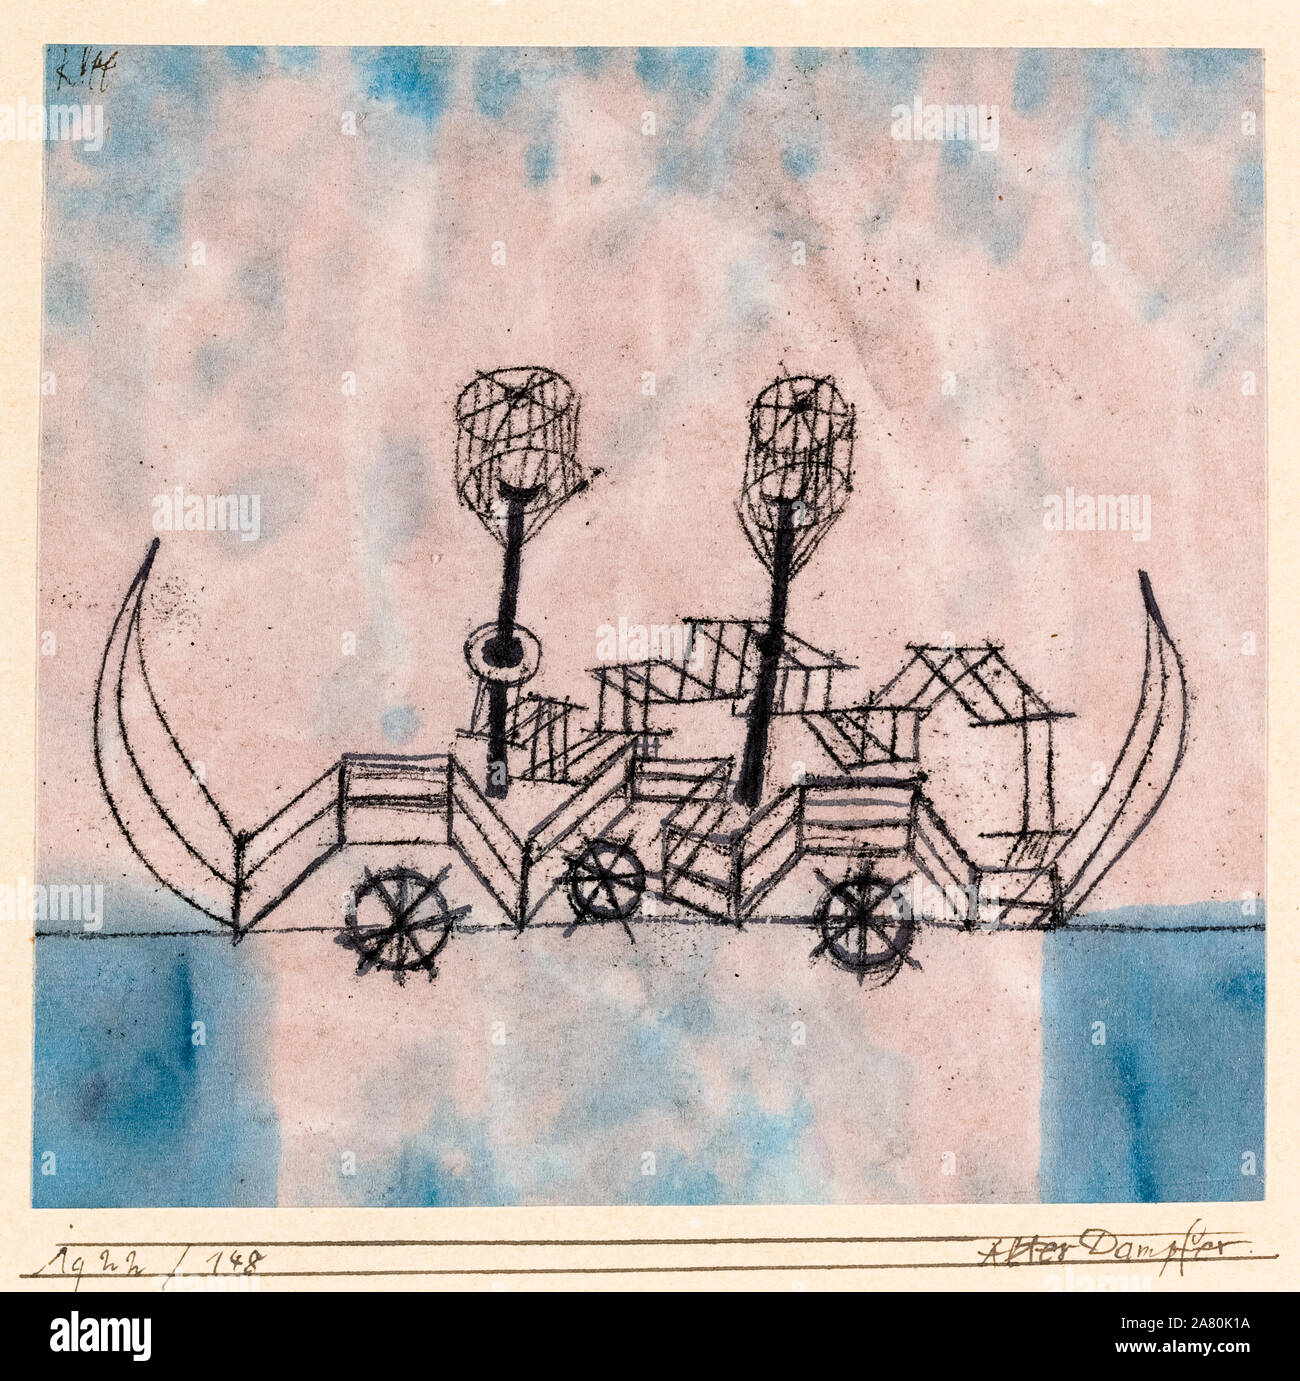 Paul Klee, Alter Dampfer, (Old Steamboat), abstract painting, 1922 Stock Photo